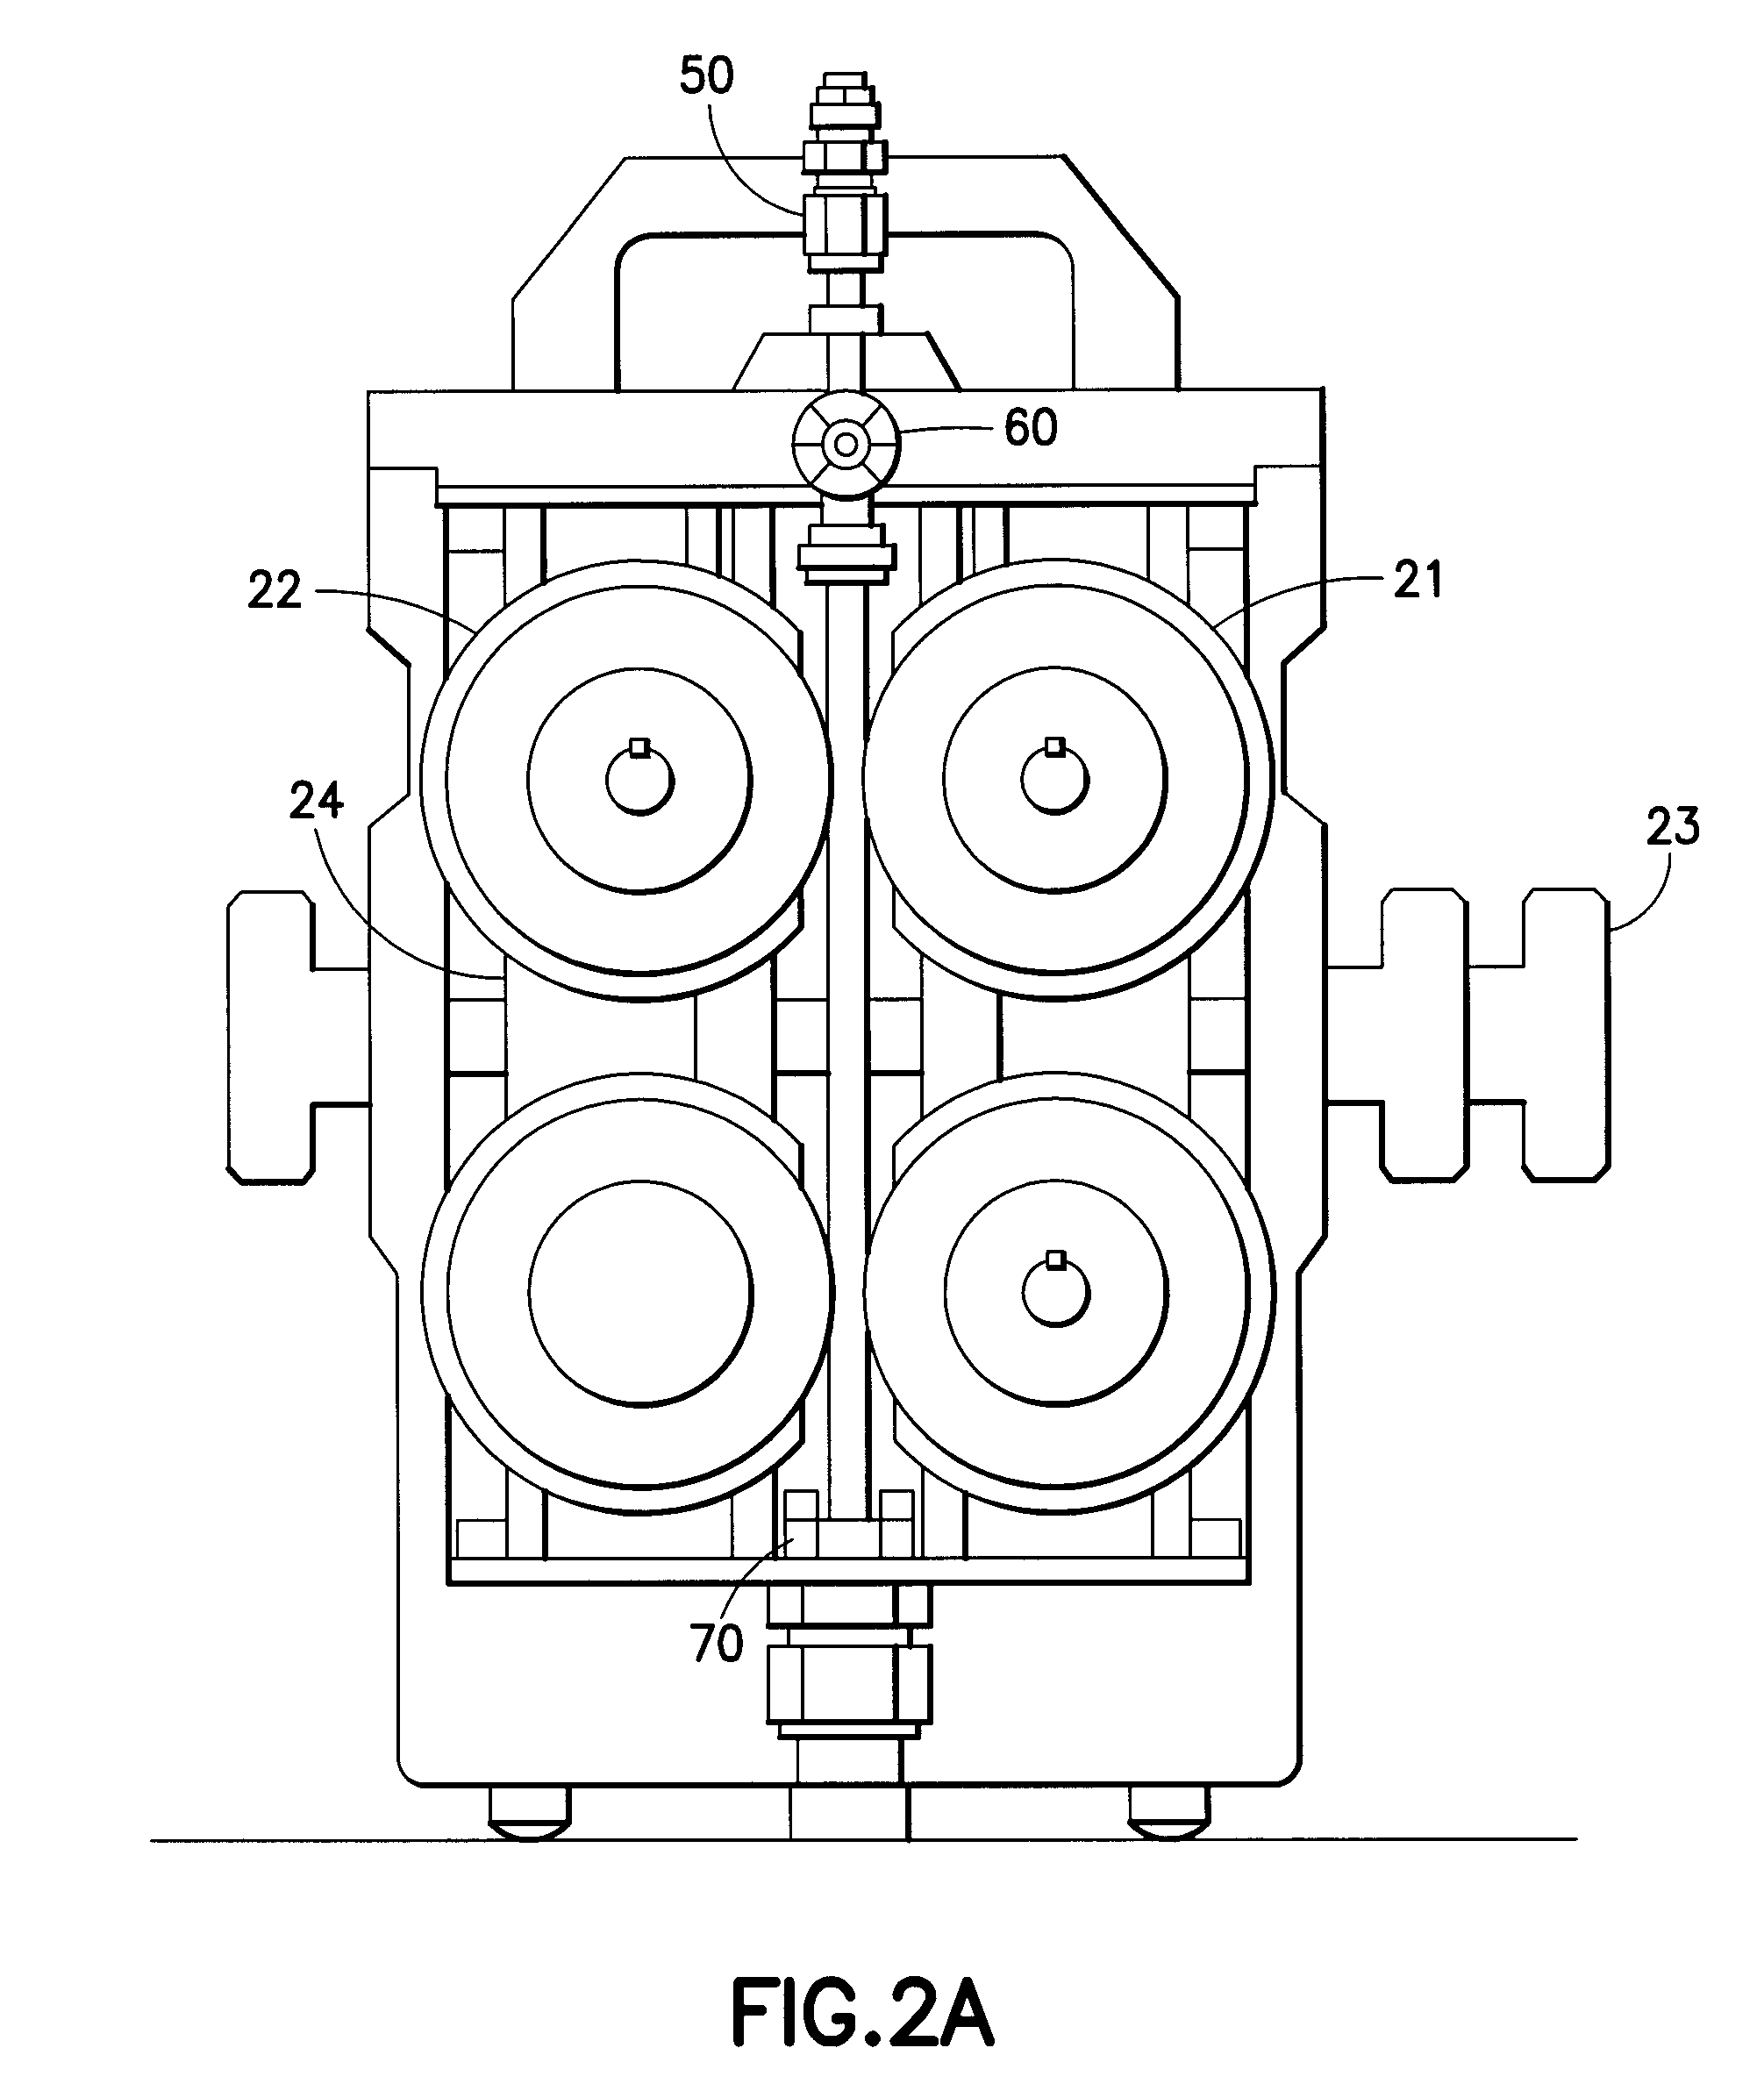 Handling system for in-core detector thimble tube of reactor